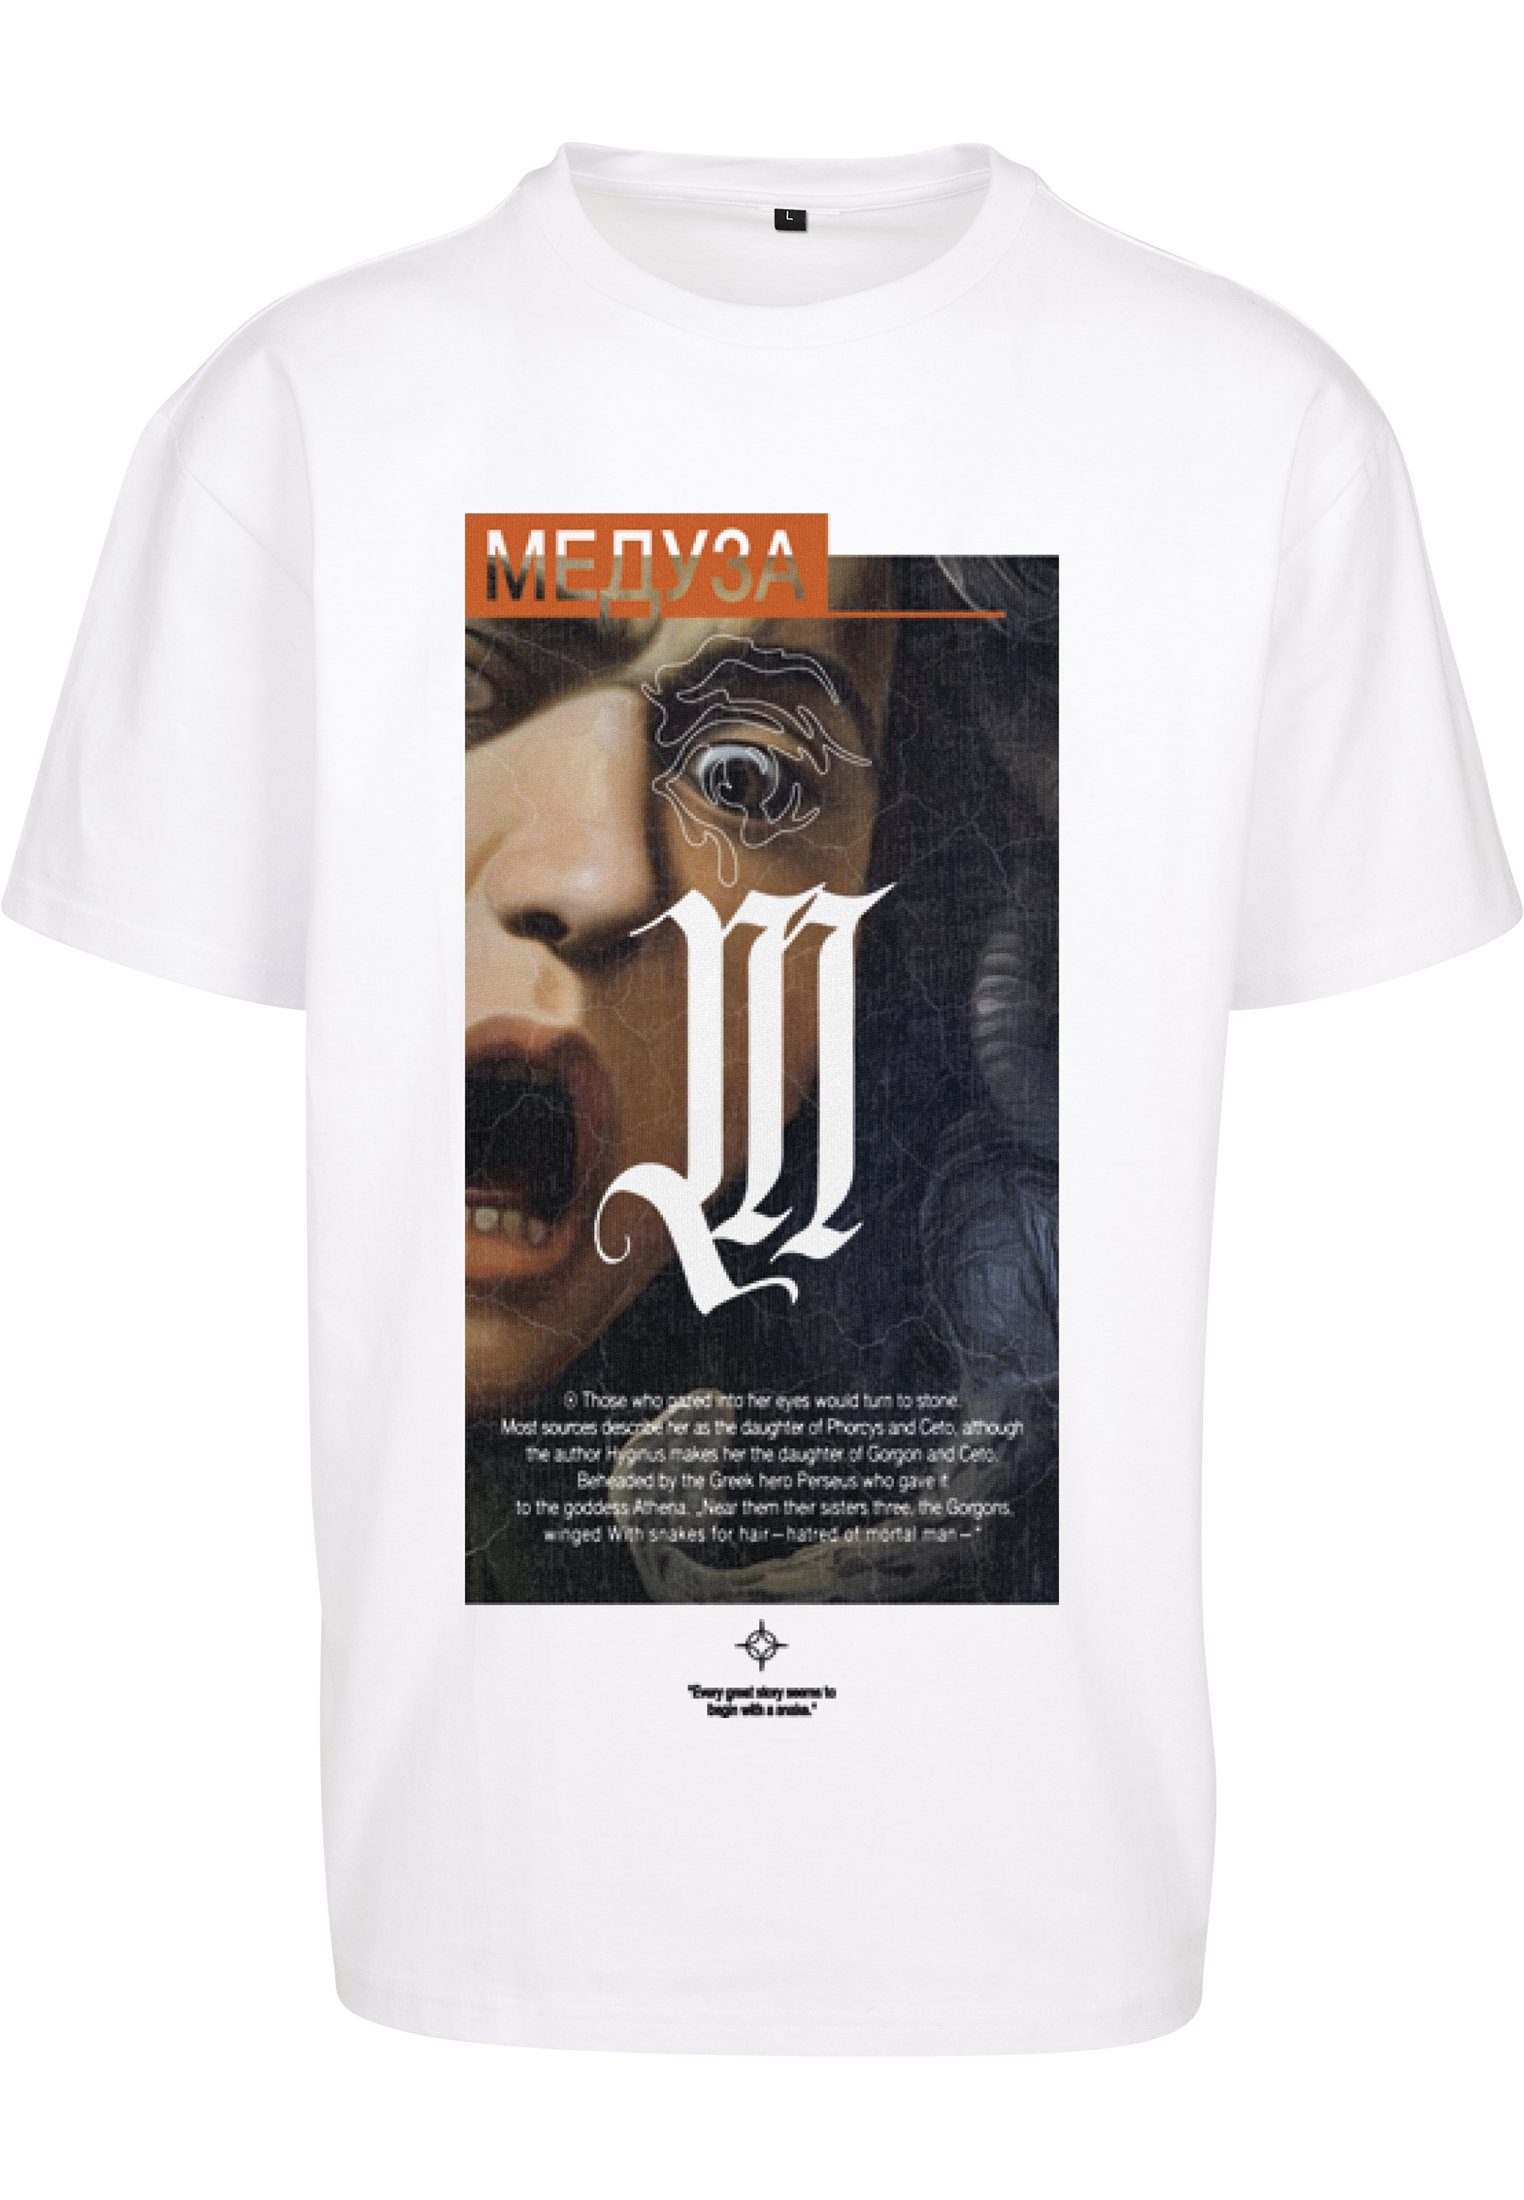 Oversize Dusa Painting Mister Tee Kurzarmshirt white Upscale Tee by (1-tlg) Accessoires